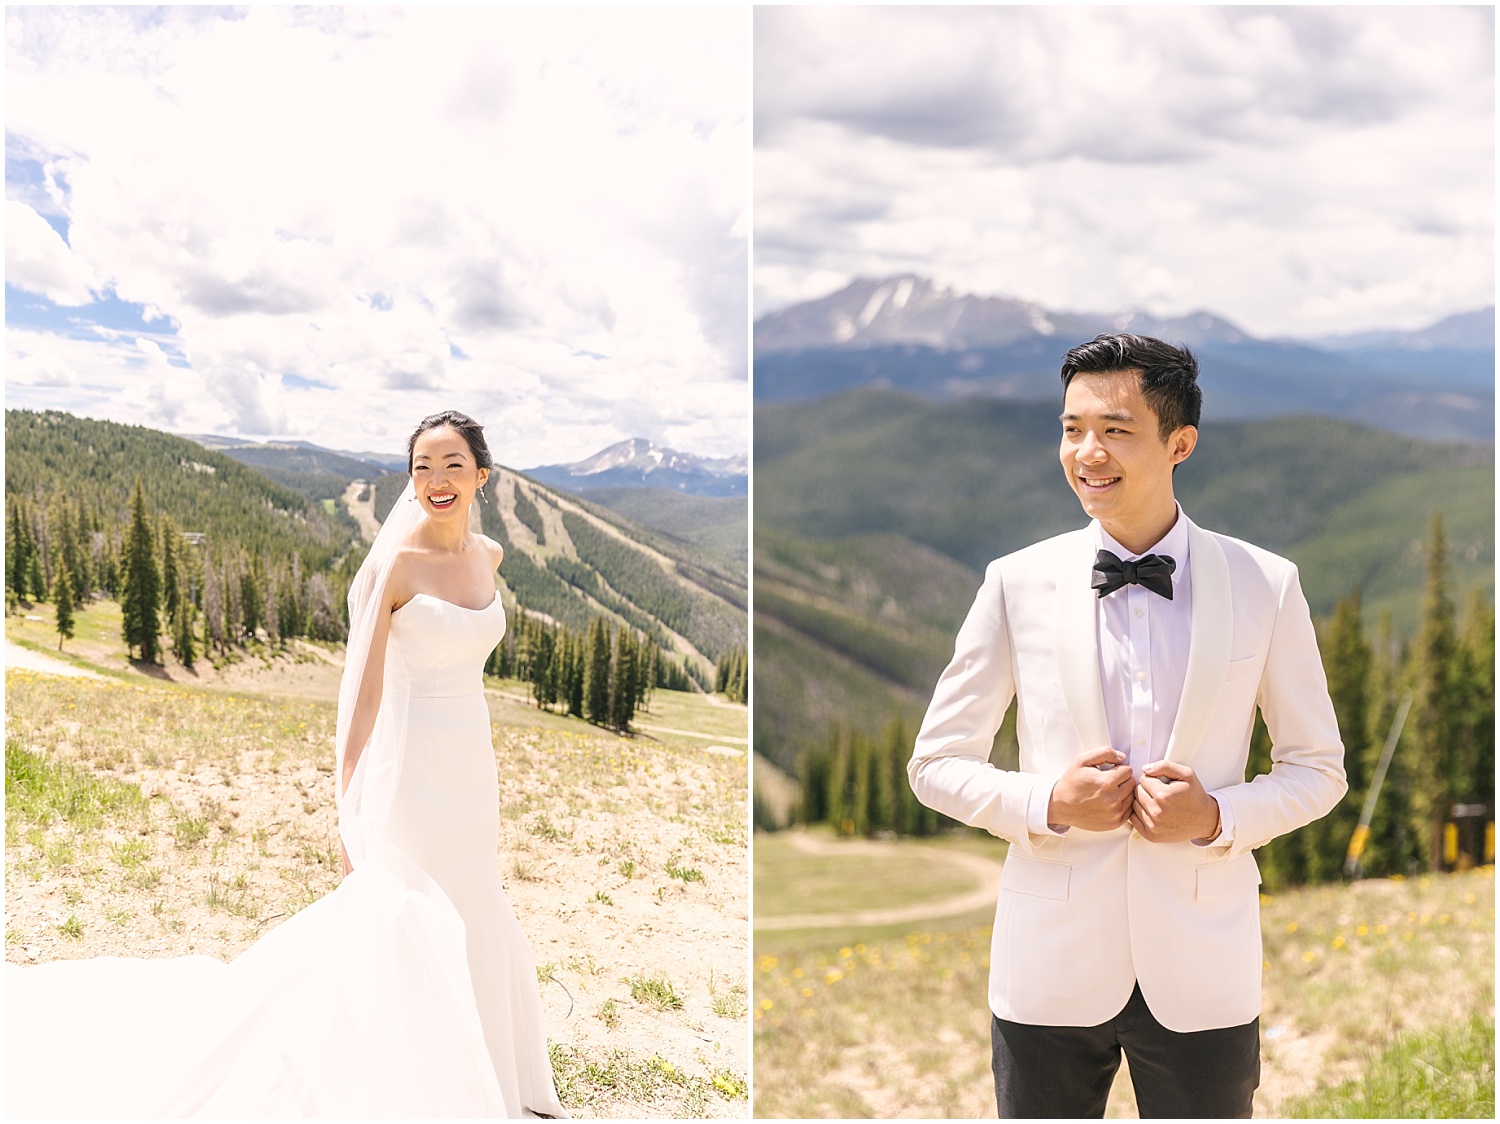 bride and groom classic portraits for mountain wedding at Keystone Summit Colorado